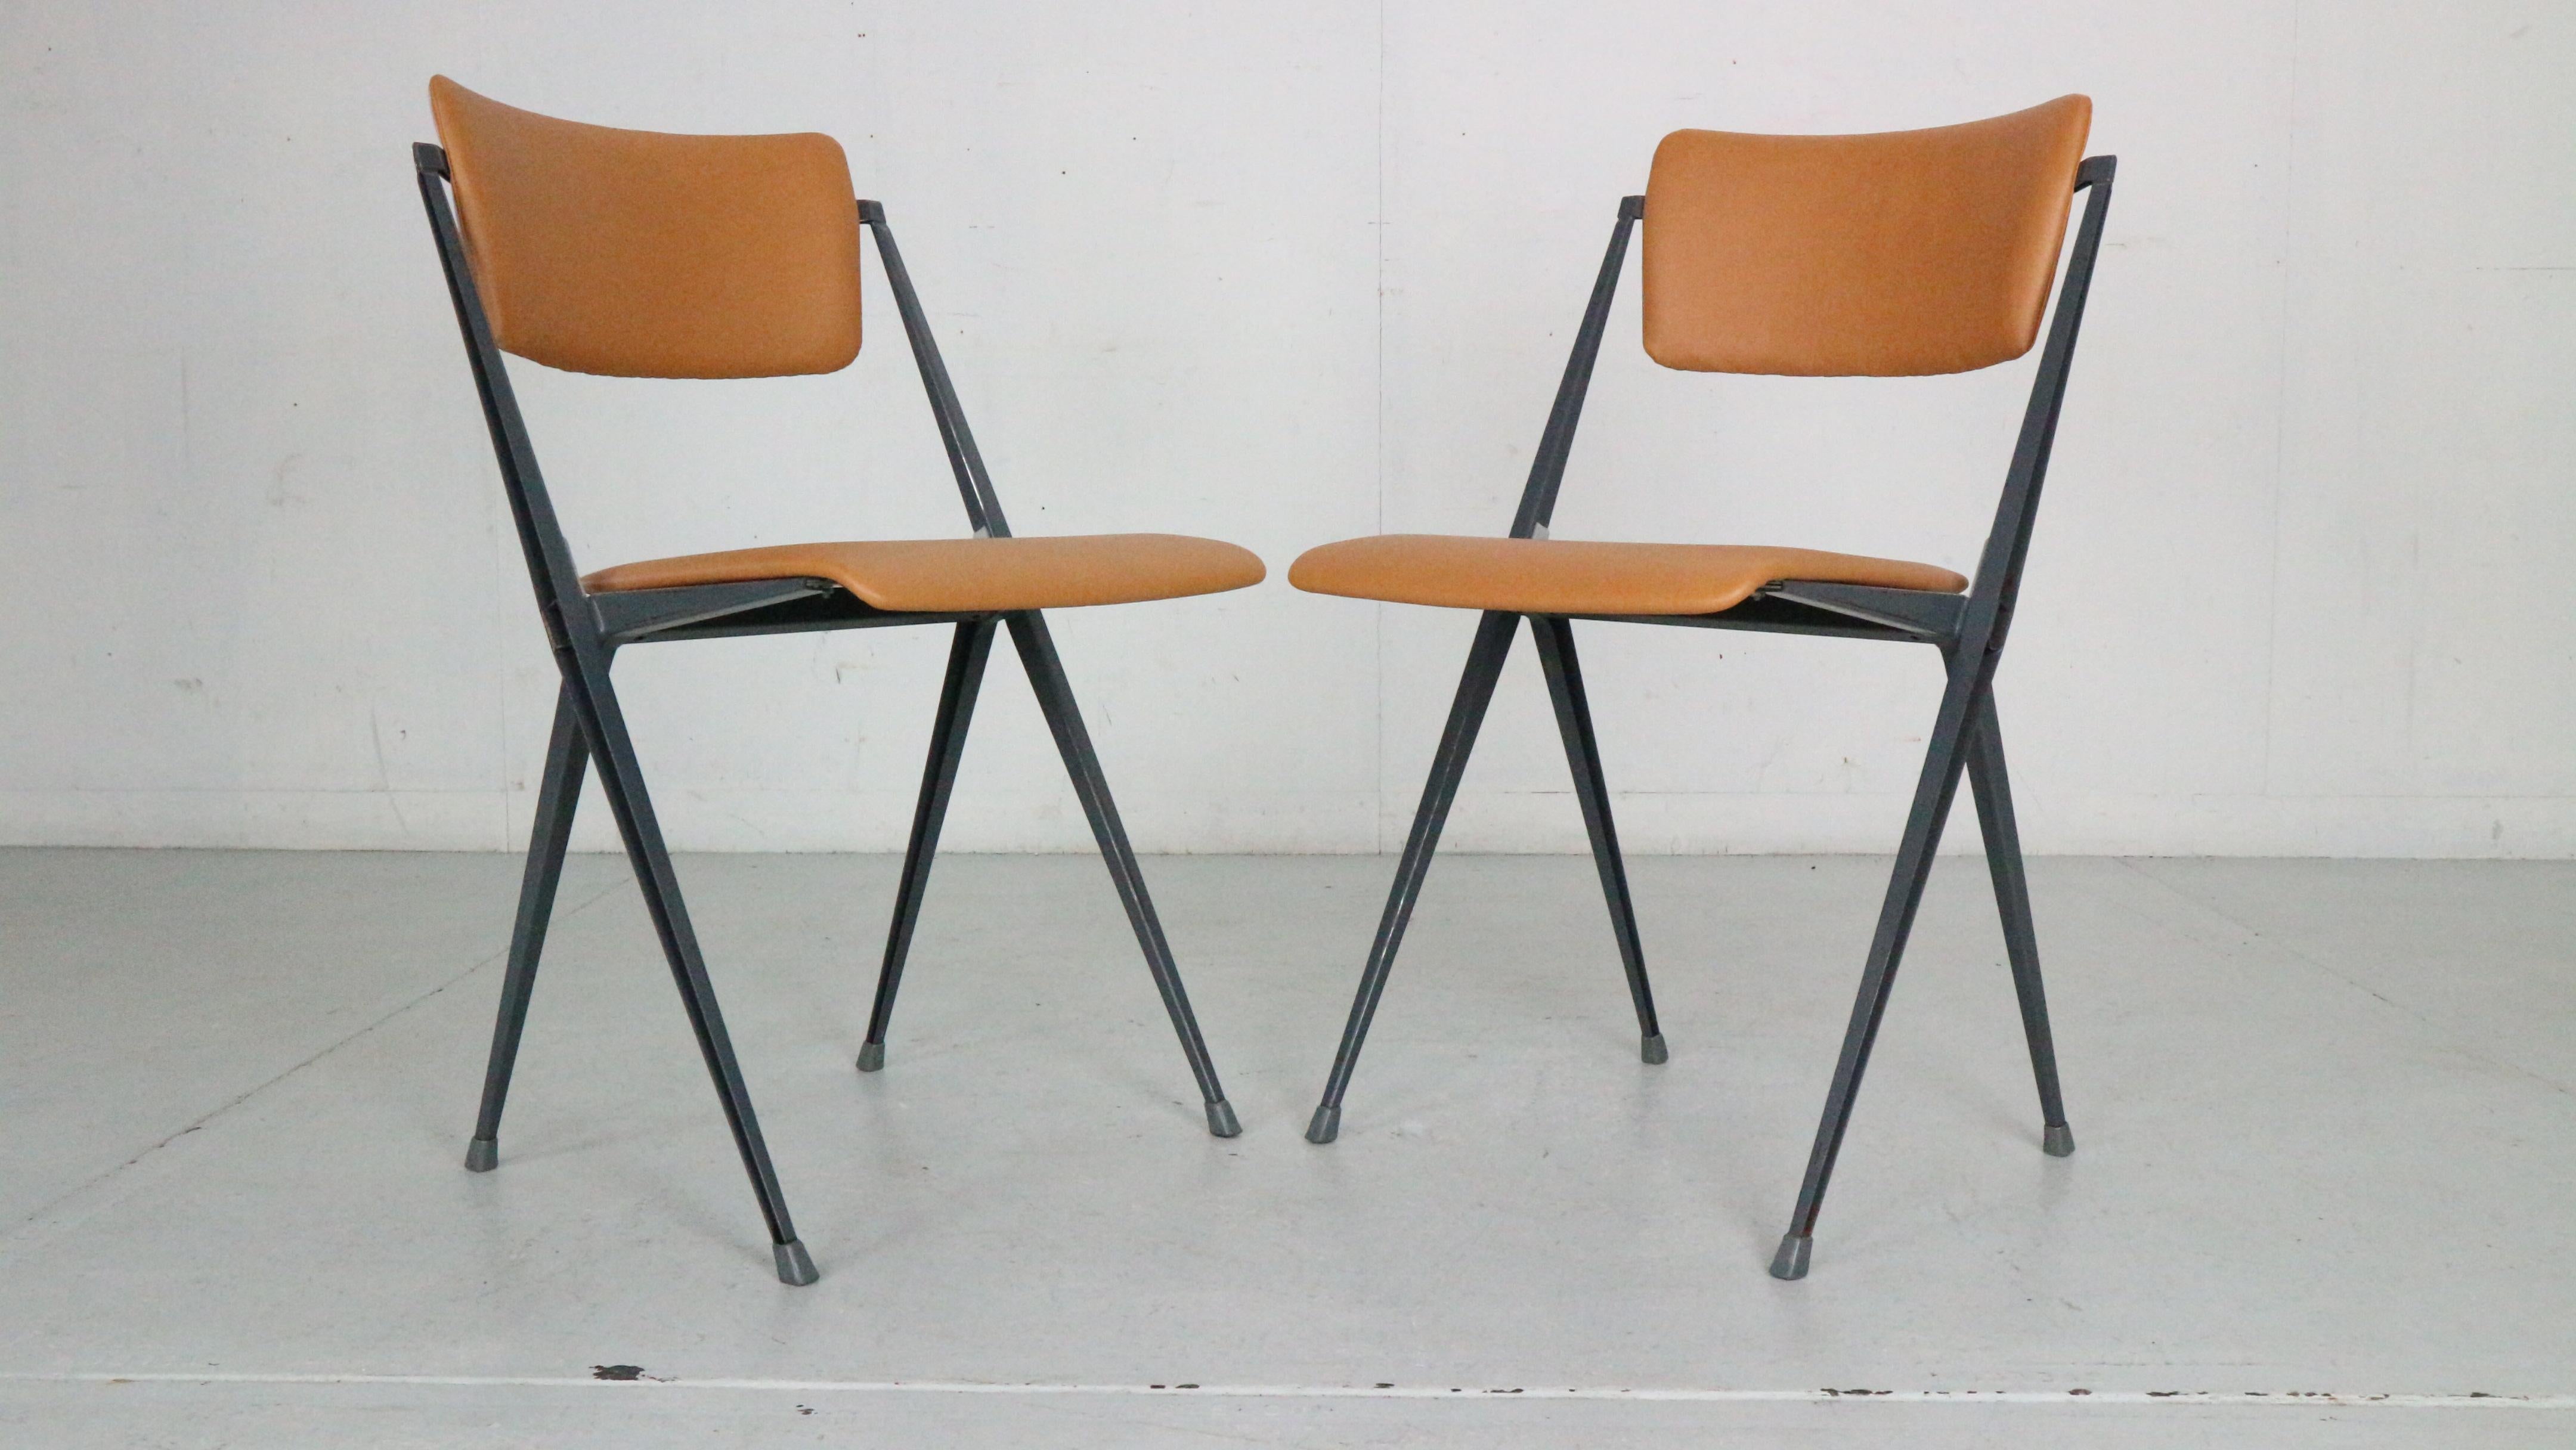 Wim Rietveld Set Of 4 Pyramide Chairs For De Cirkel, 1966 Netherlands For Sale 5